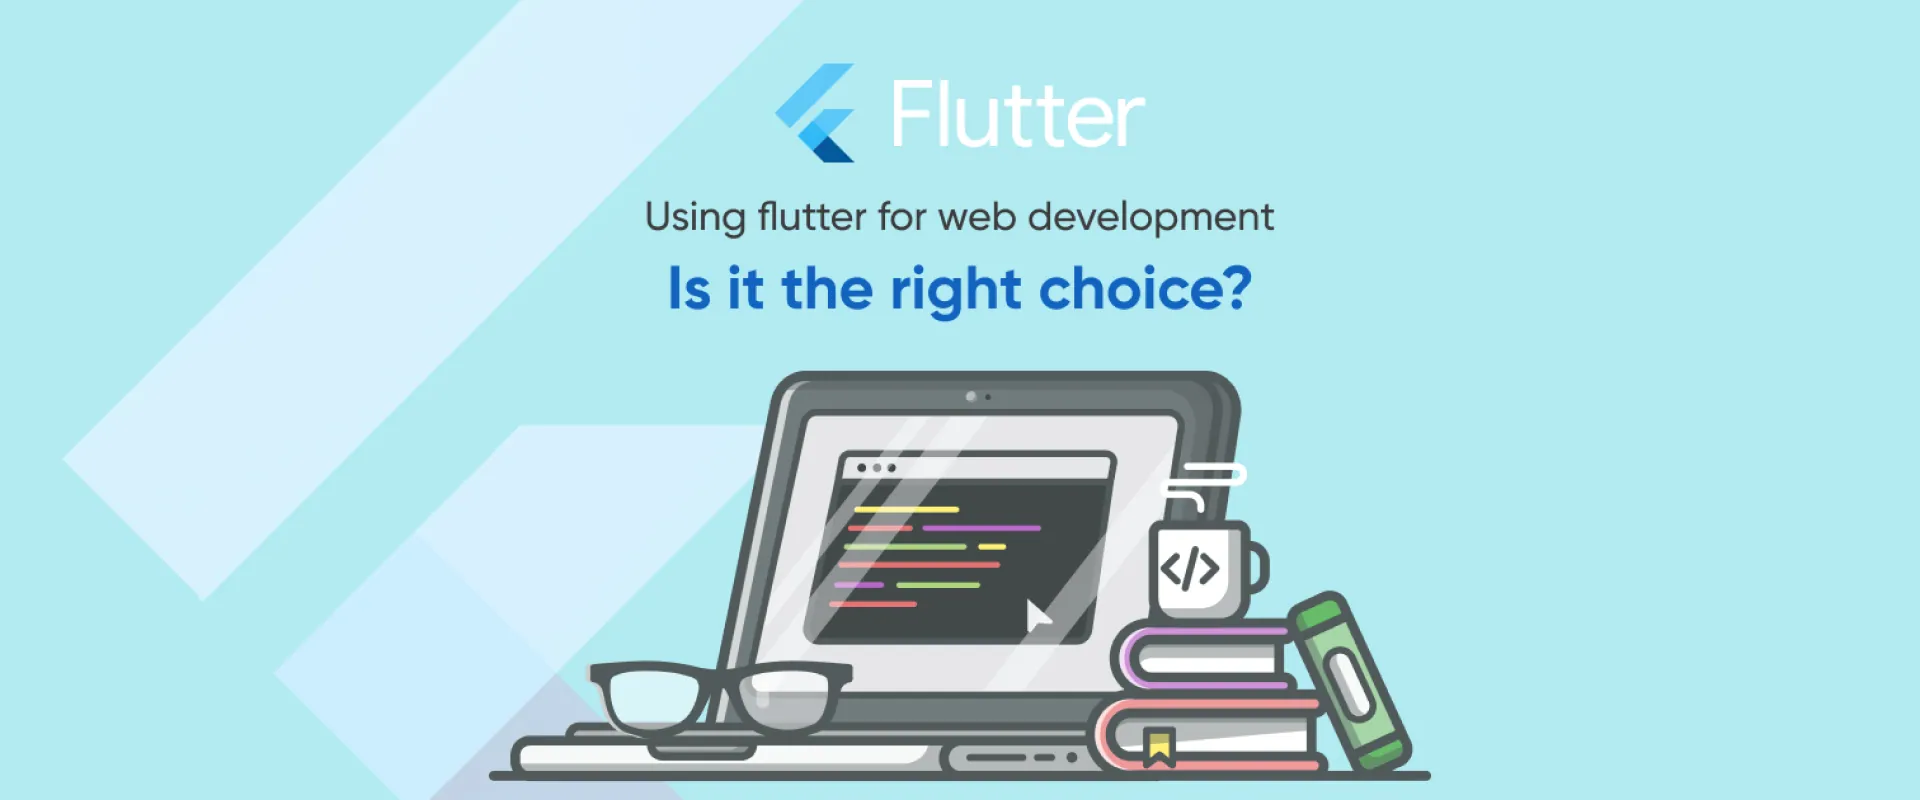 Using-flutter-for-web-development-is-it-the-right-choice